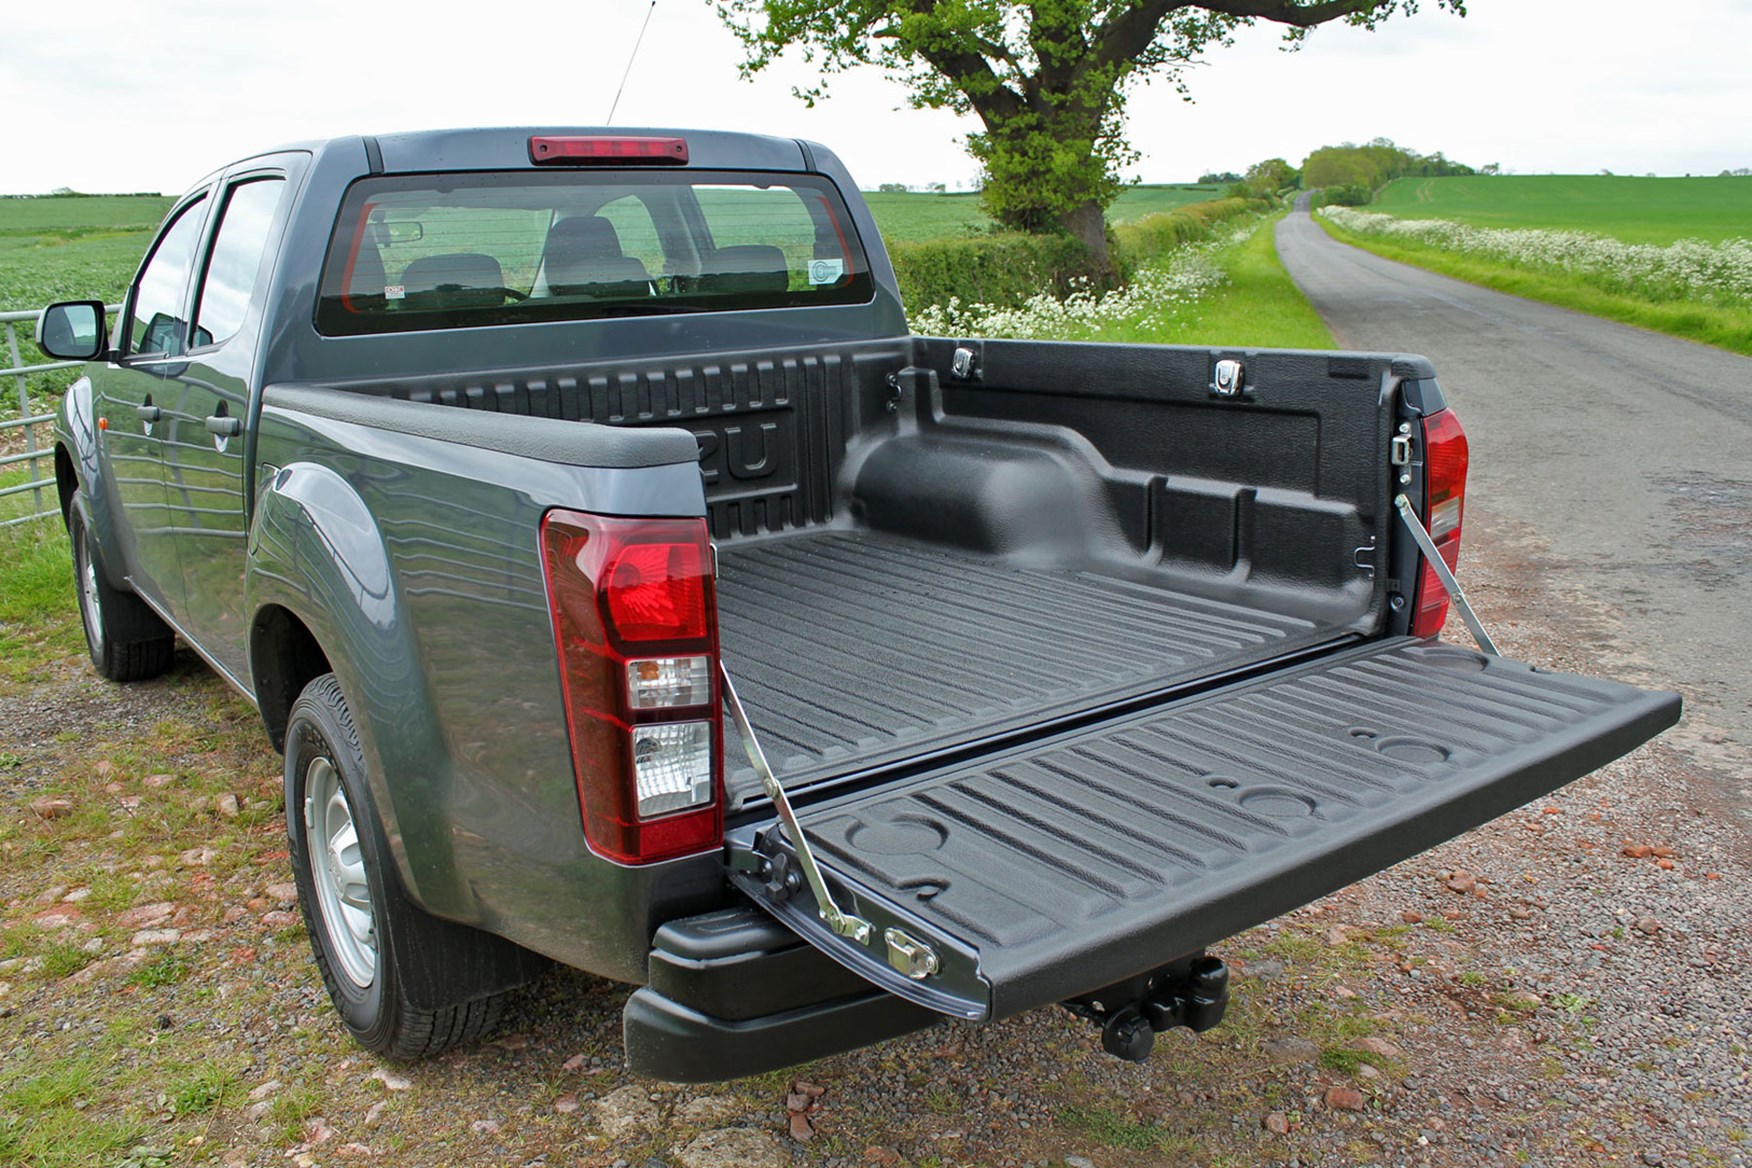 Isuzu D-Max Utility 1.9 review - load area